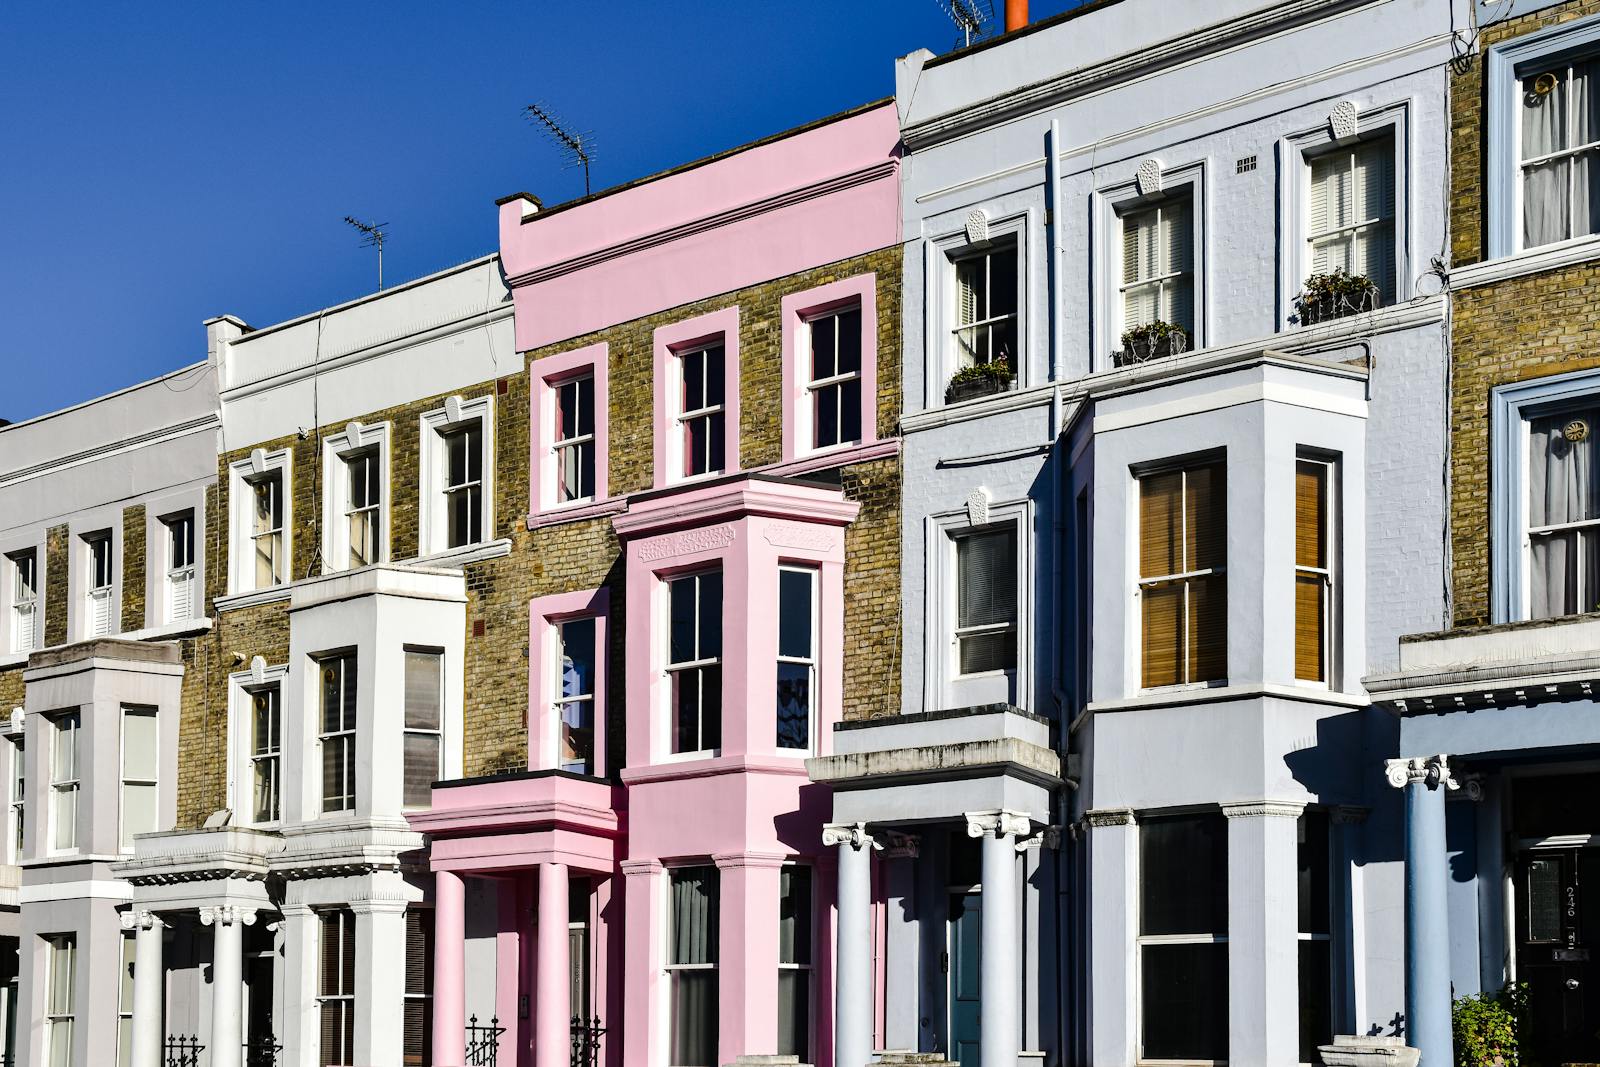 A row of houses with pink and white paint